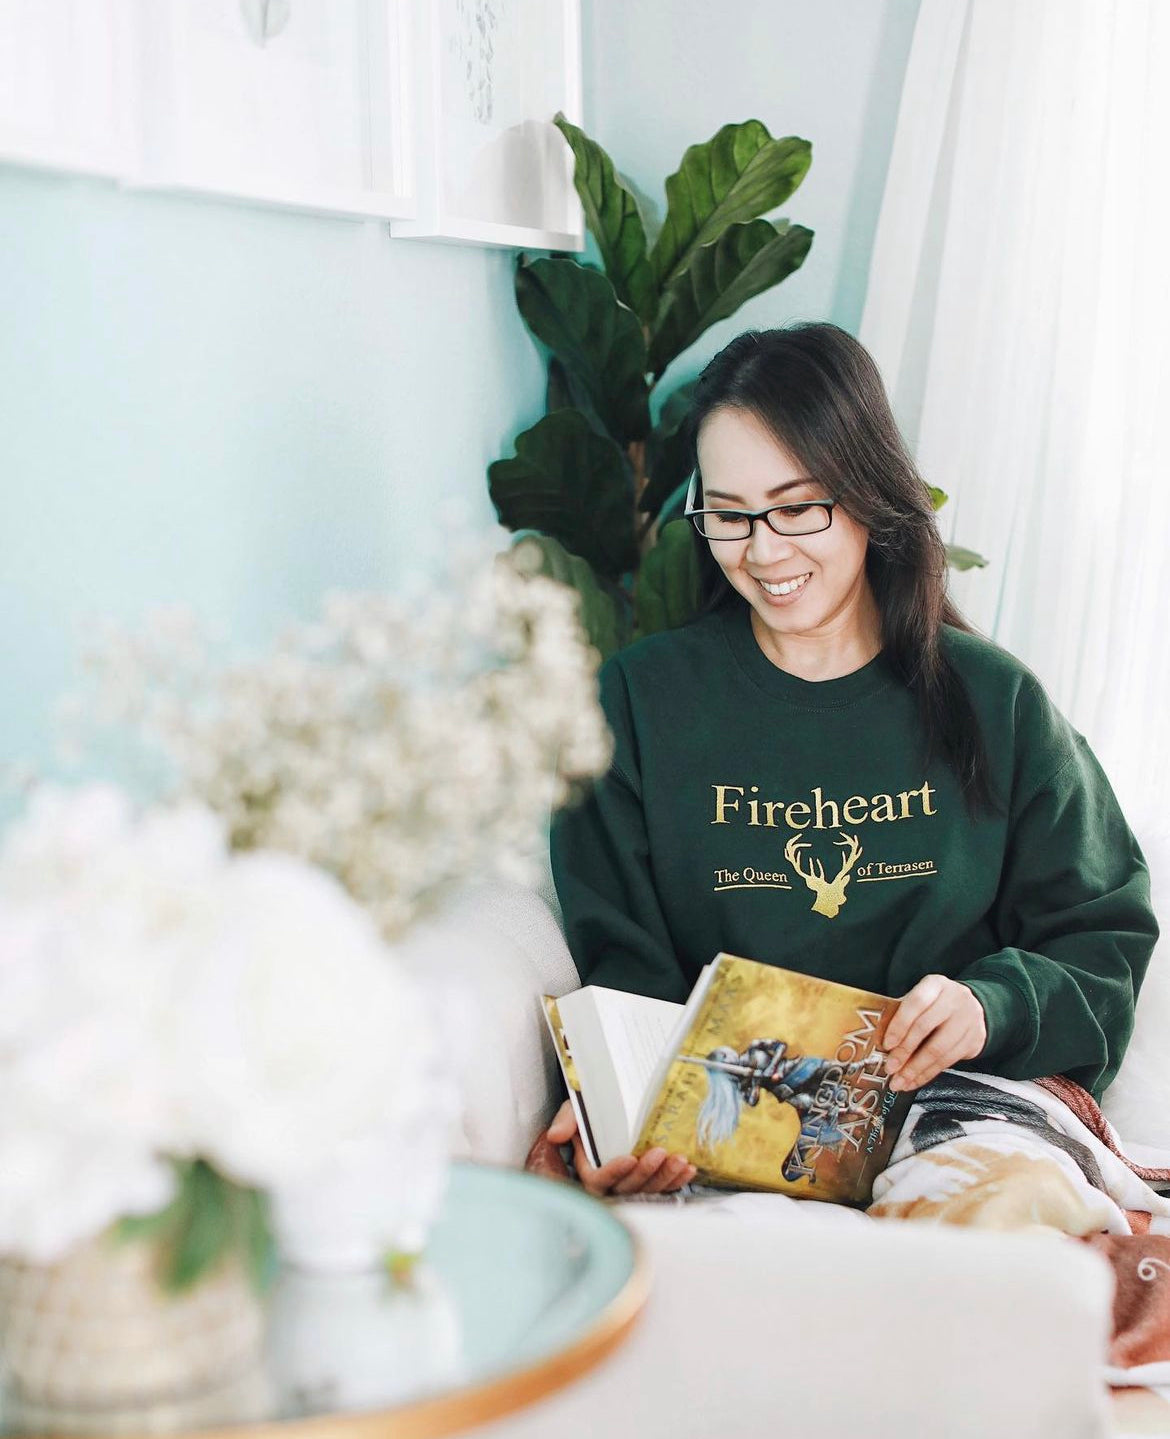 Fireheart - The Queen of Terrasen Embroidered Sweatshirt | Throne of Glass